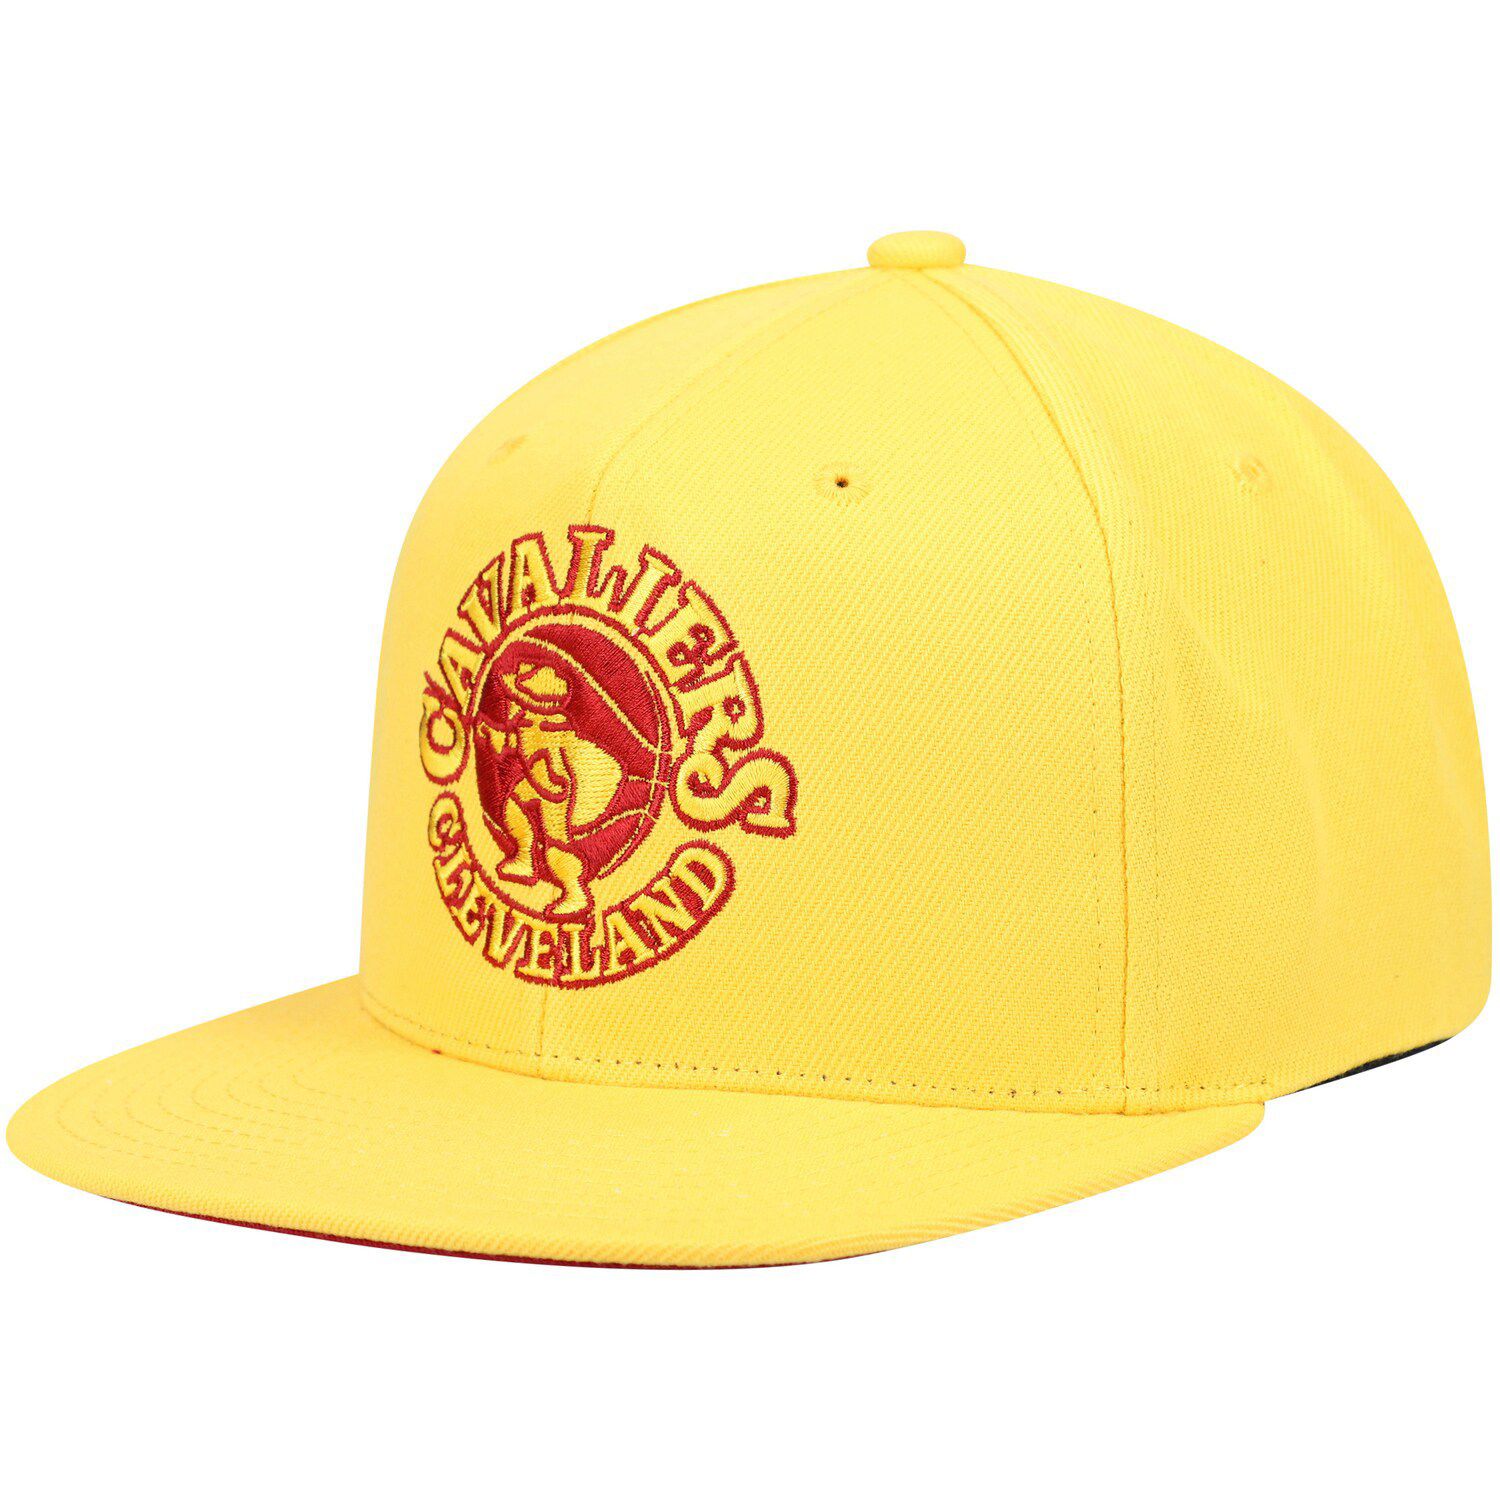 Image for Unbranded Men's Mitchell & Ness Yellow Cleveland Cavaliers Hardwood Classics Tonal Snapback Hat at Kohl's.